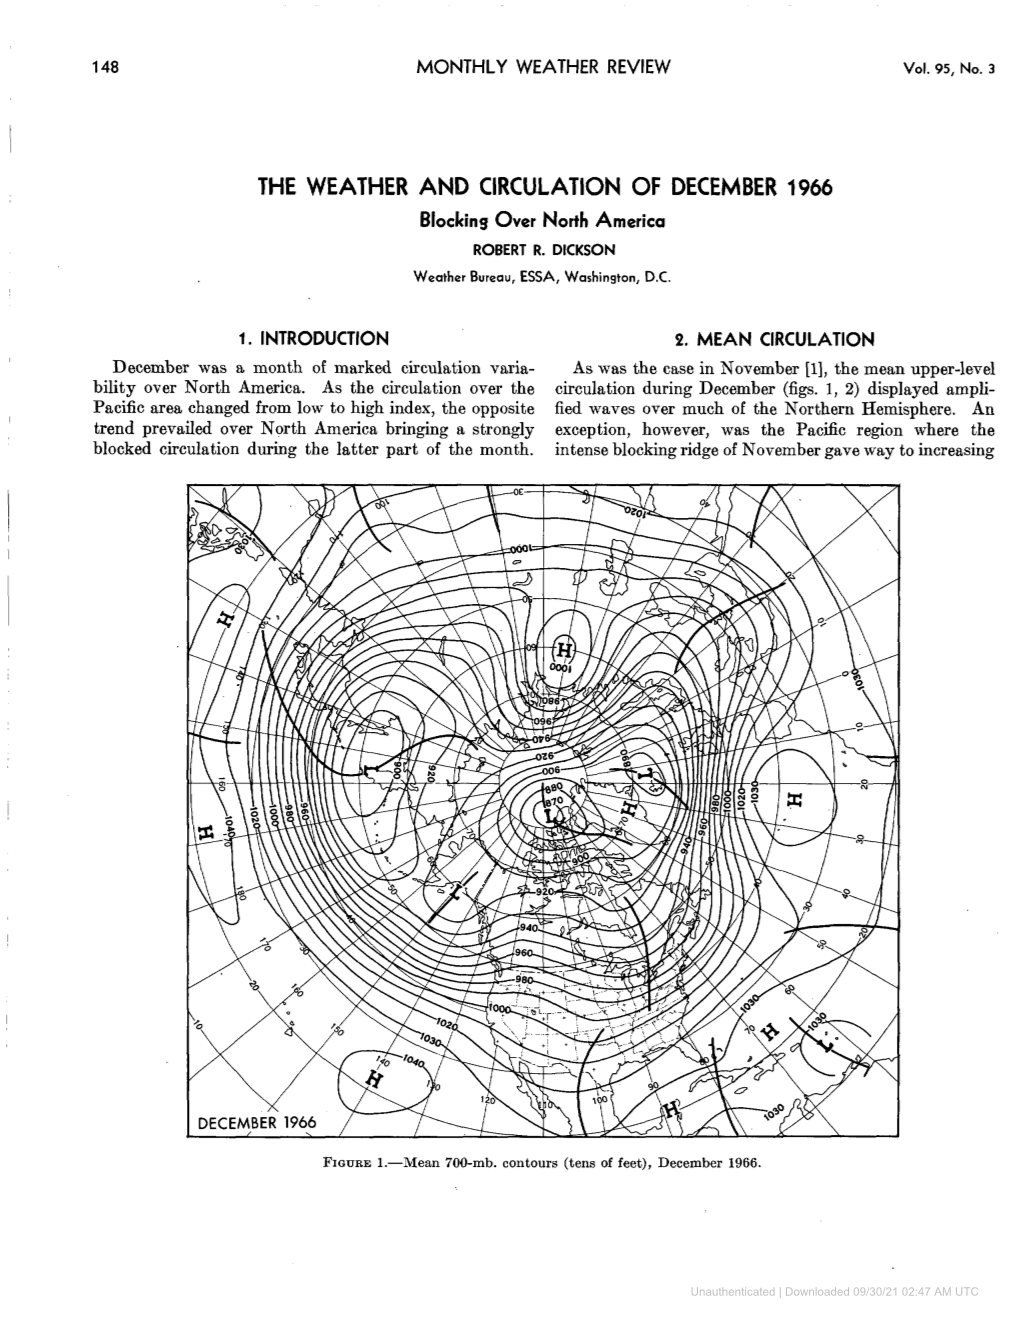 THE WEATHER and CIRCULATION of DECEMBER 1966 Blocking Over North America ROBERT R